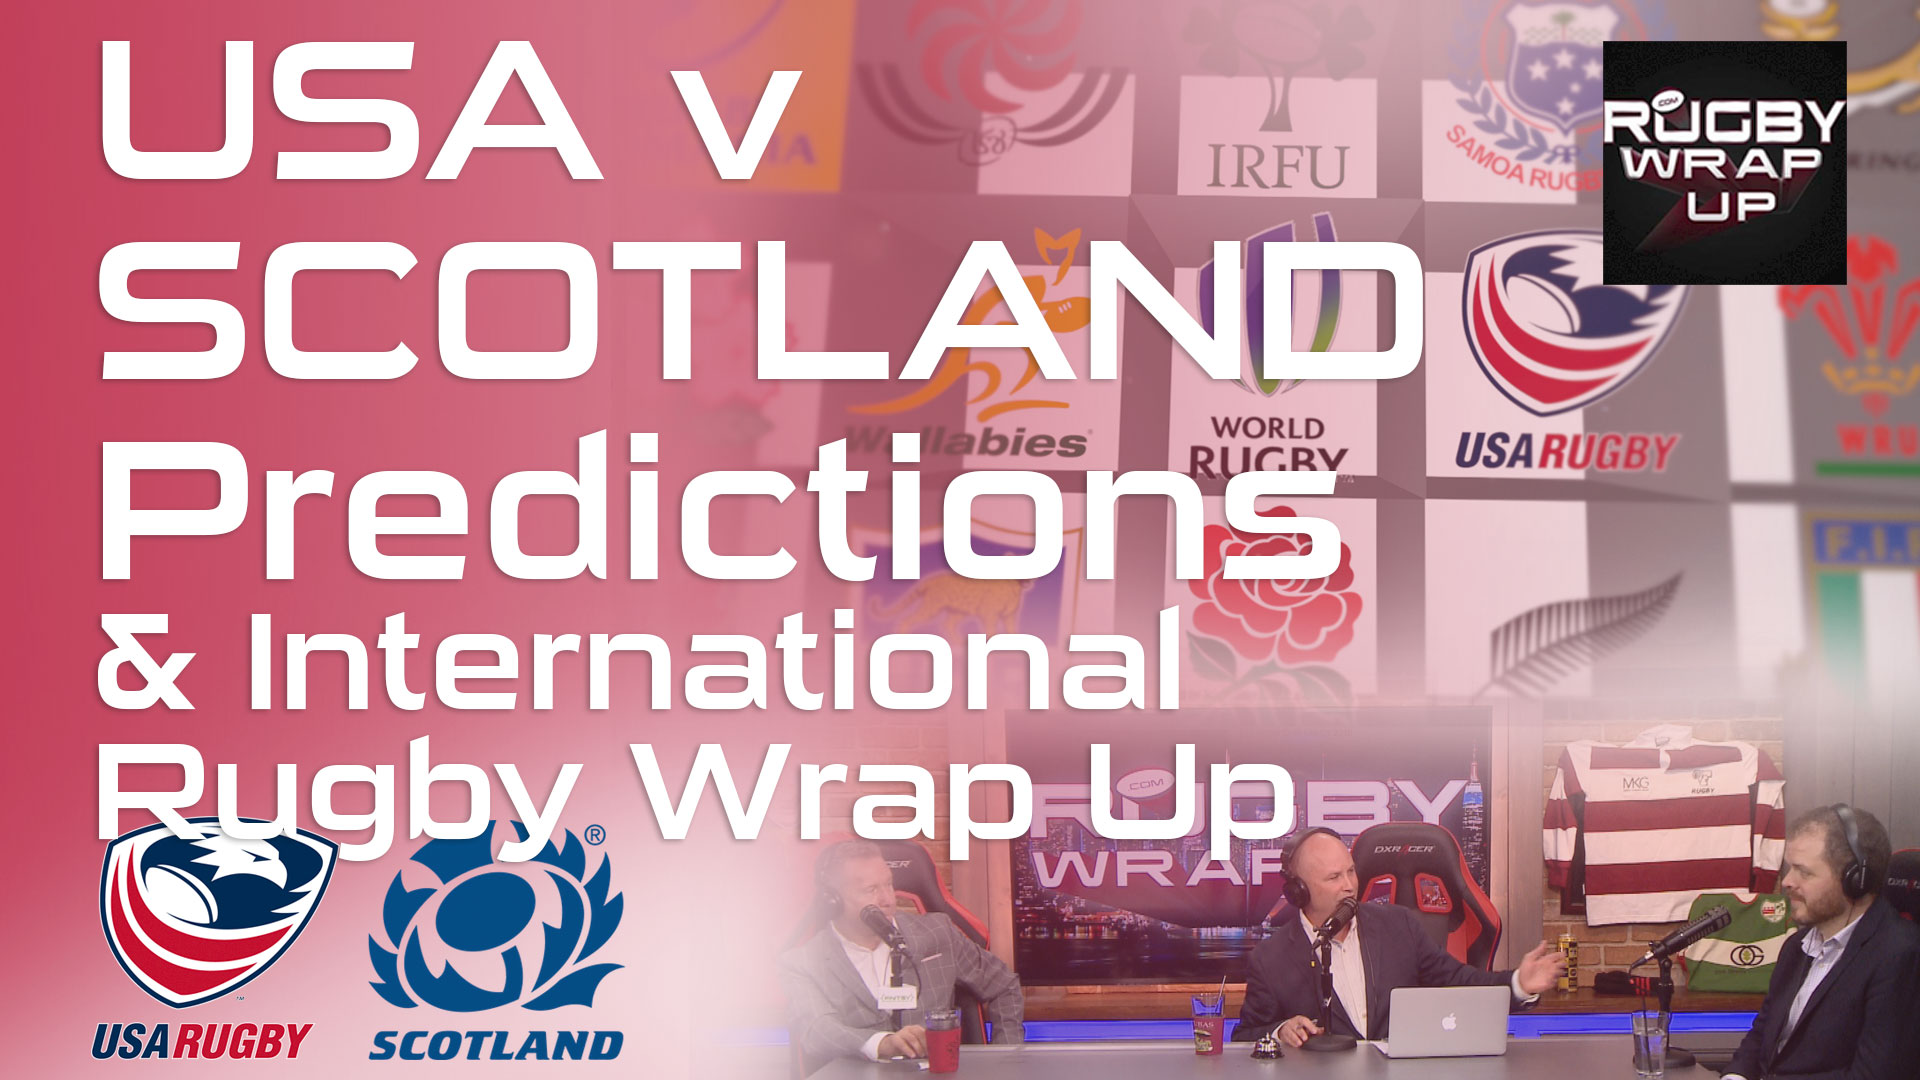 Rugby TV and Podcast: #USAv SCO Debate, Mud-Slinging, Predictions from fired-up trio of Steve Lewis, Martin Pengelly, Matt McCarthy